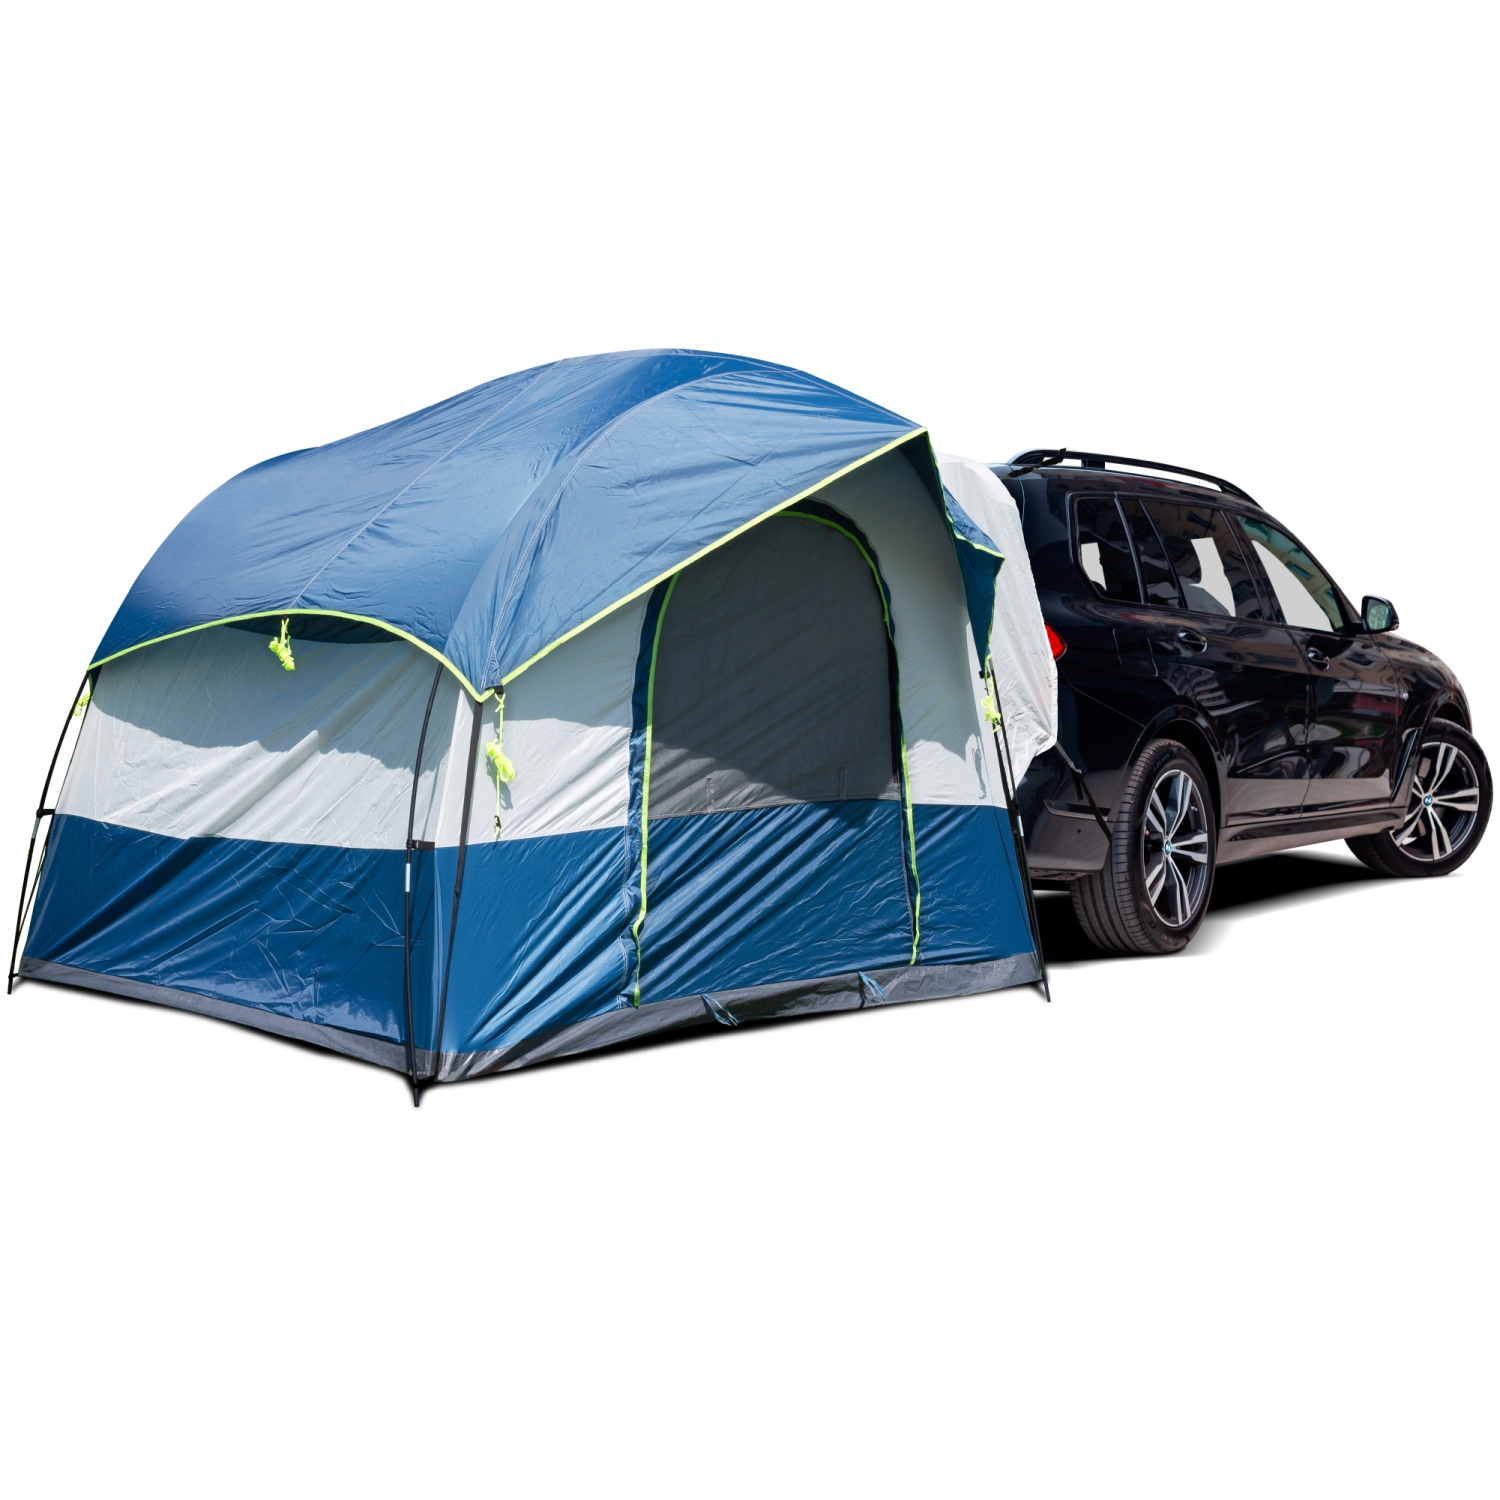 Universal SUV Camping Tent - Up to 8-Person Sleeping Capacity, Includes Rainfly and Storage Bag - Car Tent, Tailgate Tent, Glamping Tent - 8'W x 8'L x 7.2'H Gray and Blue